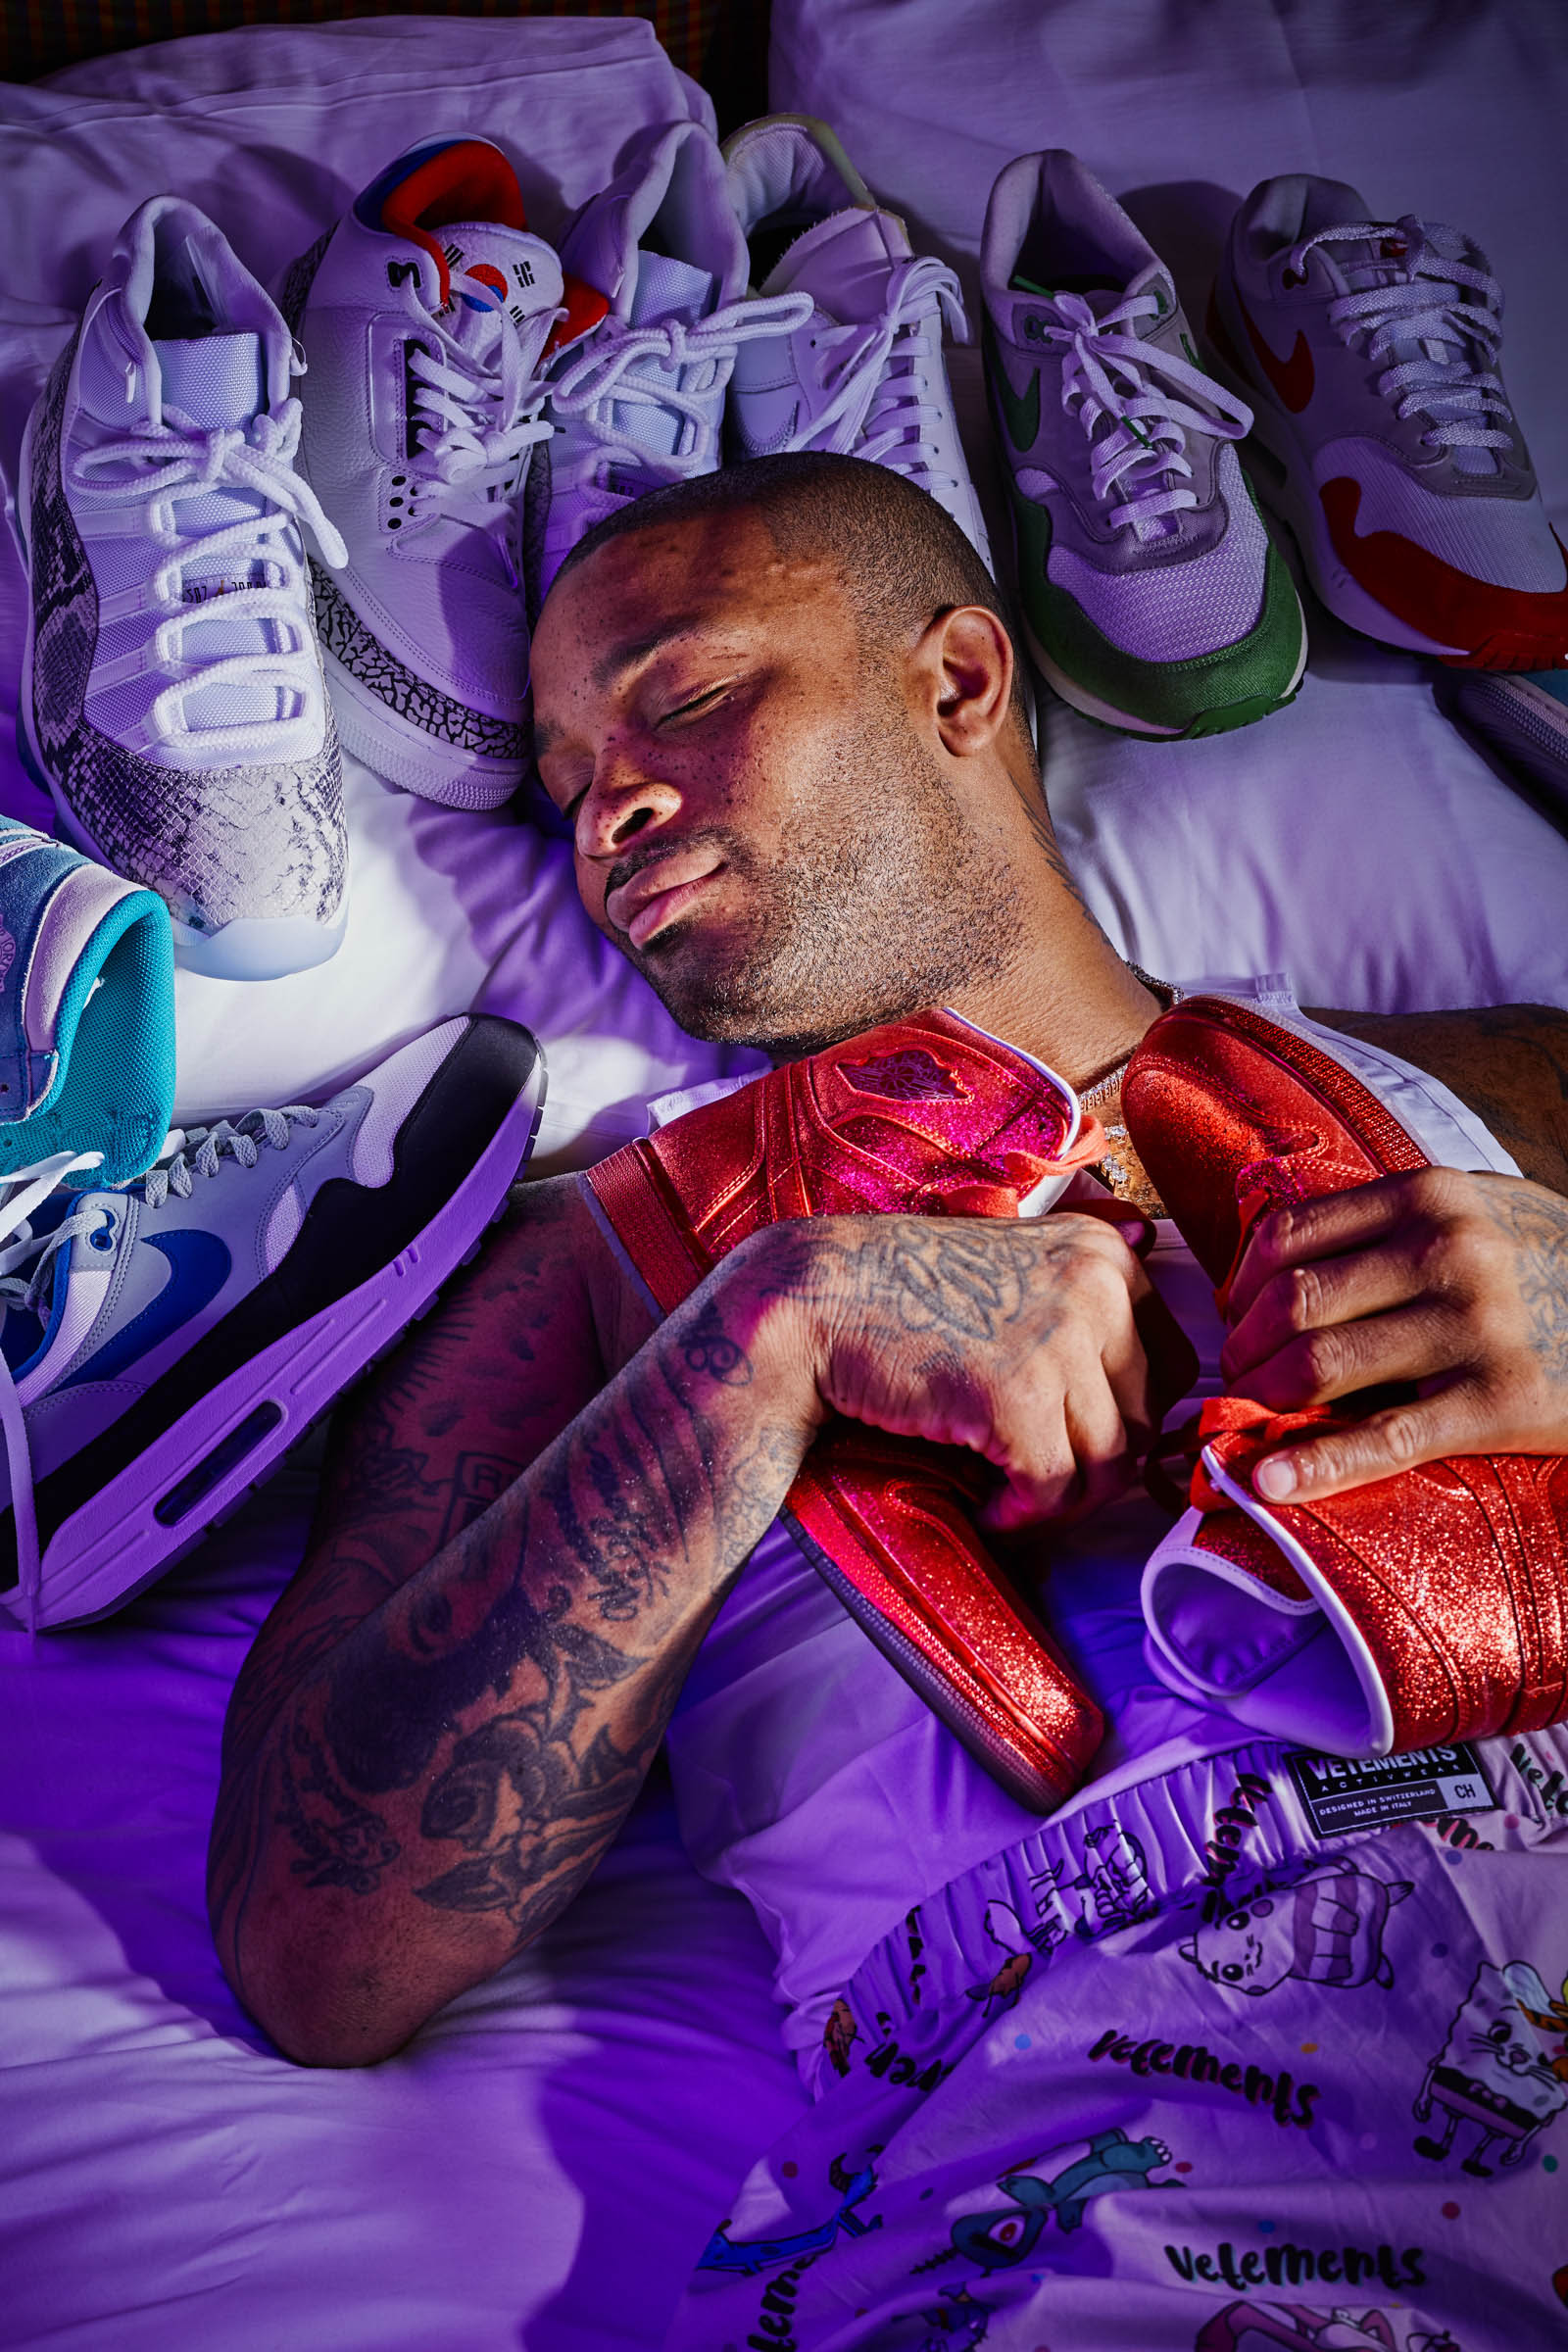 P.J. Tucker is the NBA’s sneaker king, and a forward on the Houston Rockets. Photographed sleeping in bed at the Monaco Hotel, snuggling his collection of collectible sneakers for Footwear News Magazine by Andy Batt.